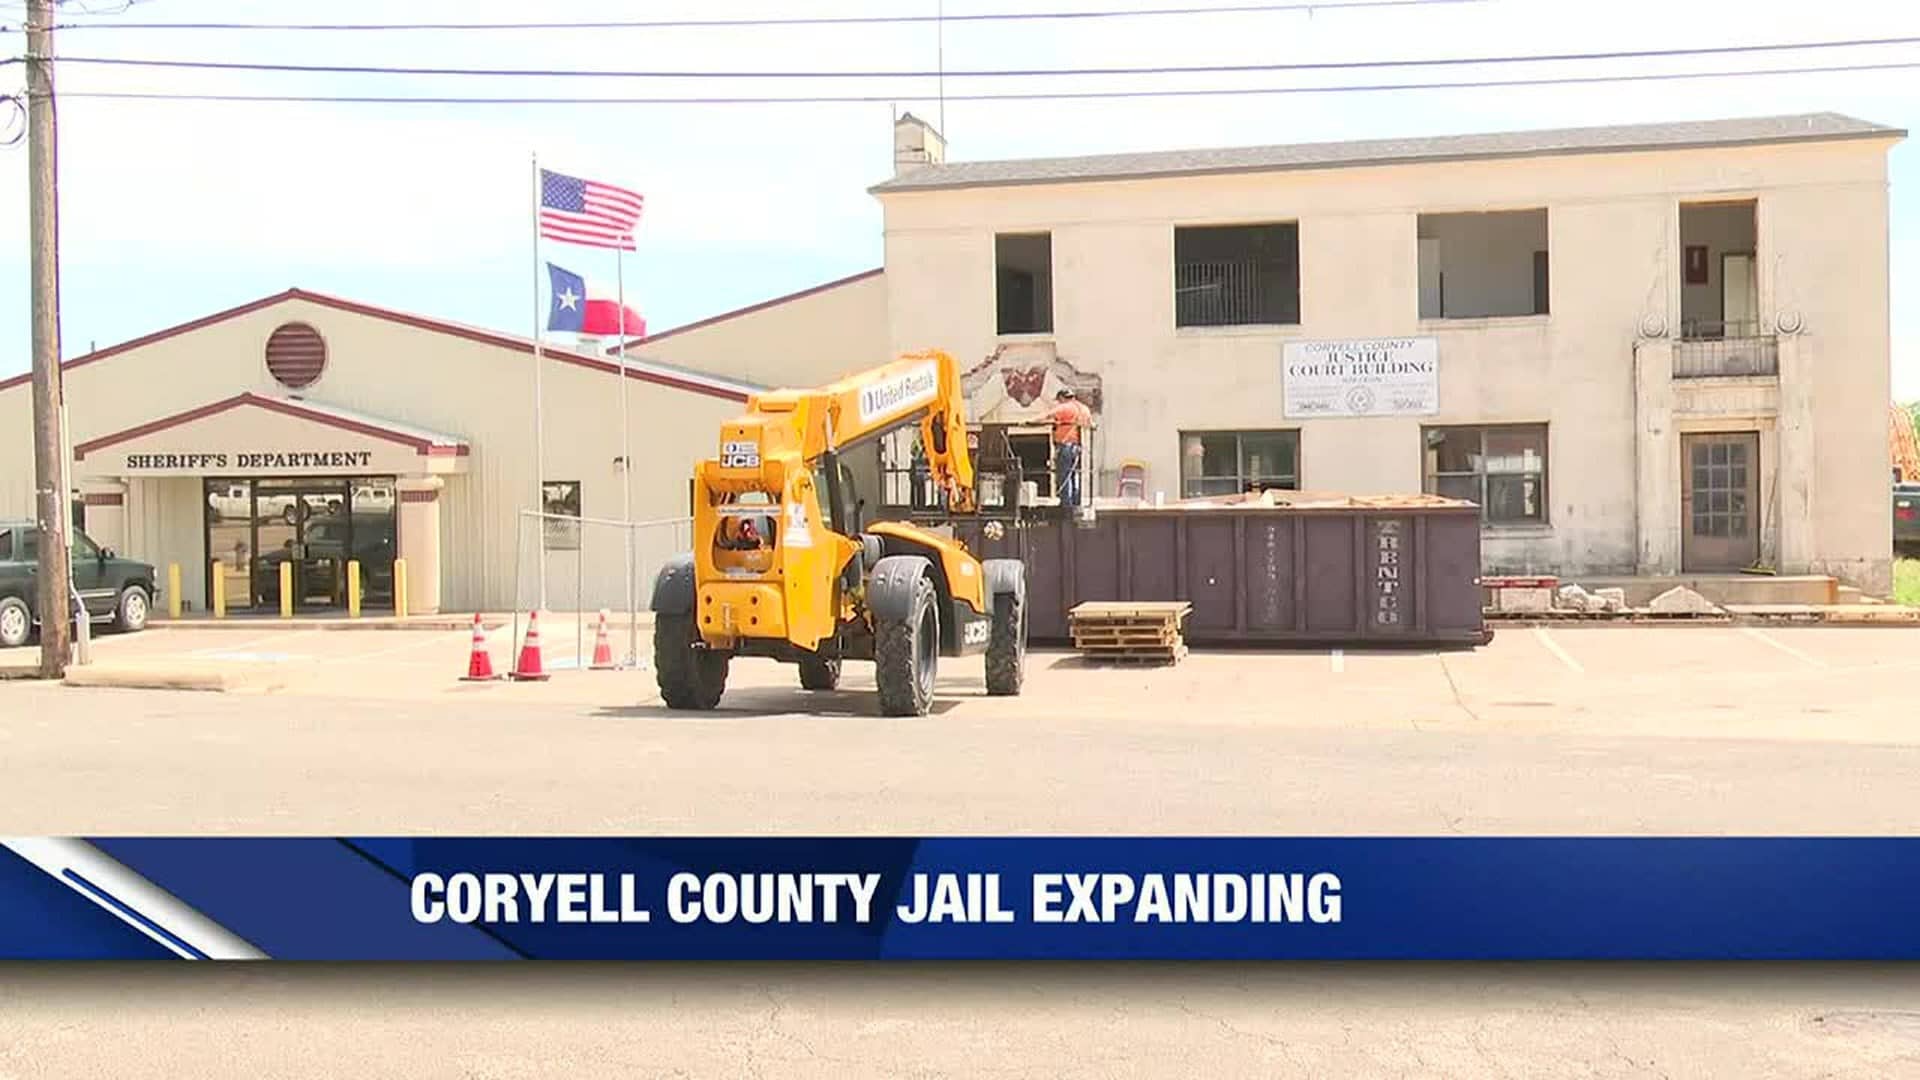 Image of Coryell County Sheriff's Department